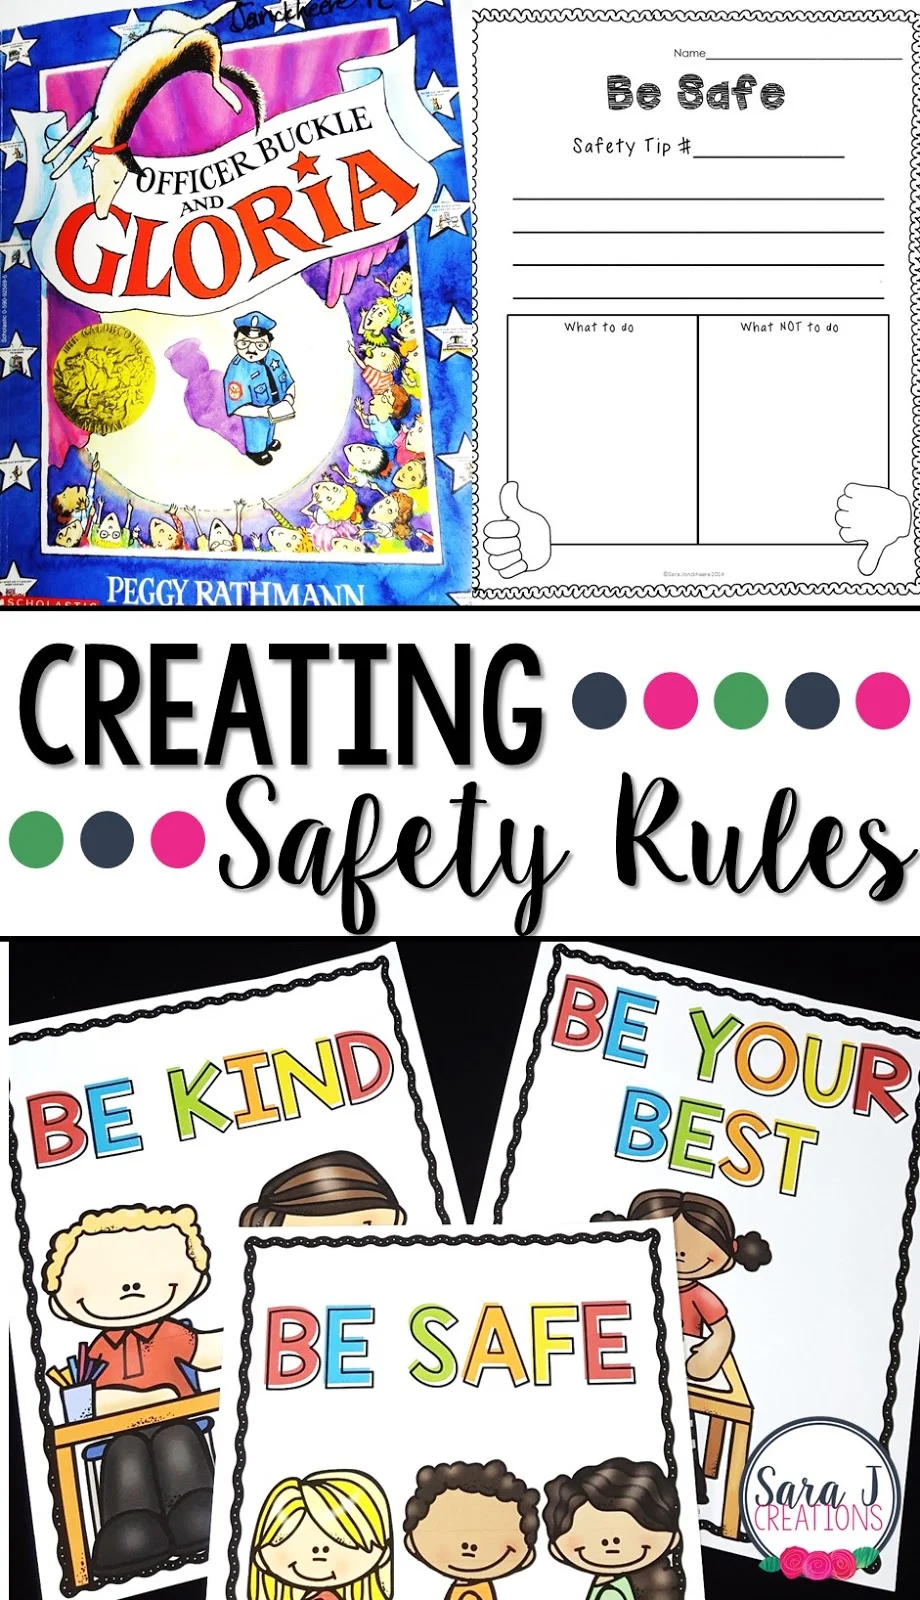 Officer Buckle and Gloria makes talking about being safe at school more fun.  Free safety tip printable for your students to use included.